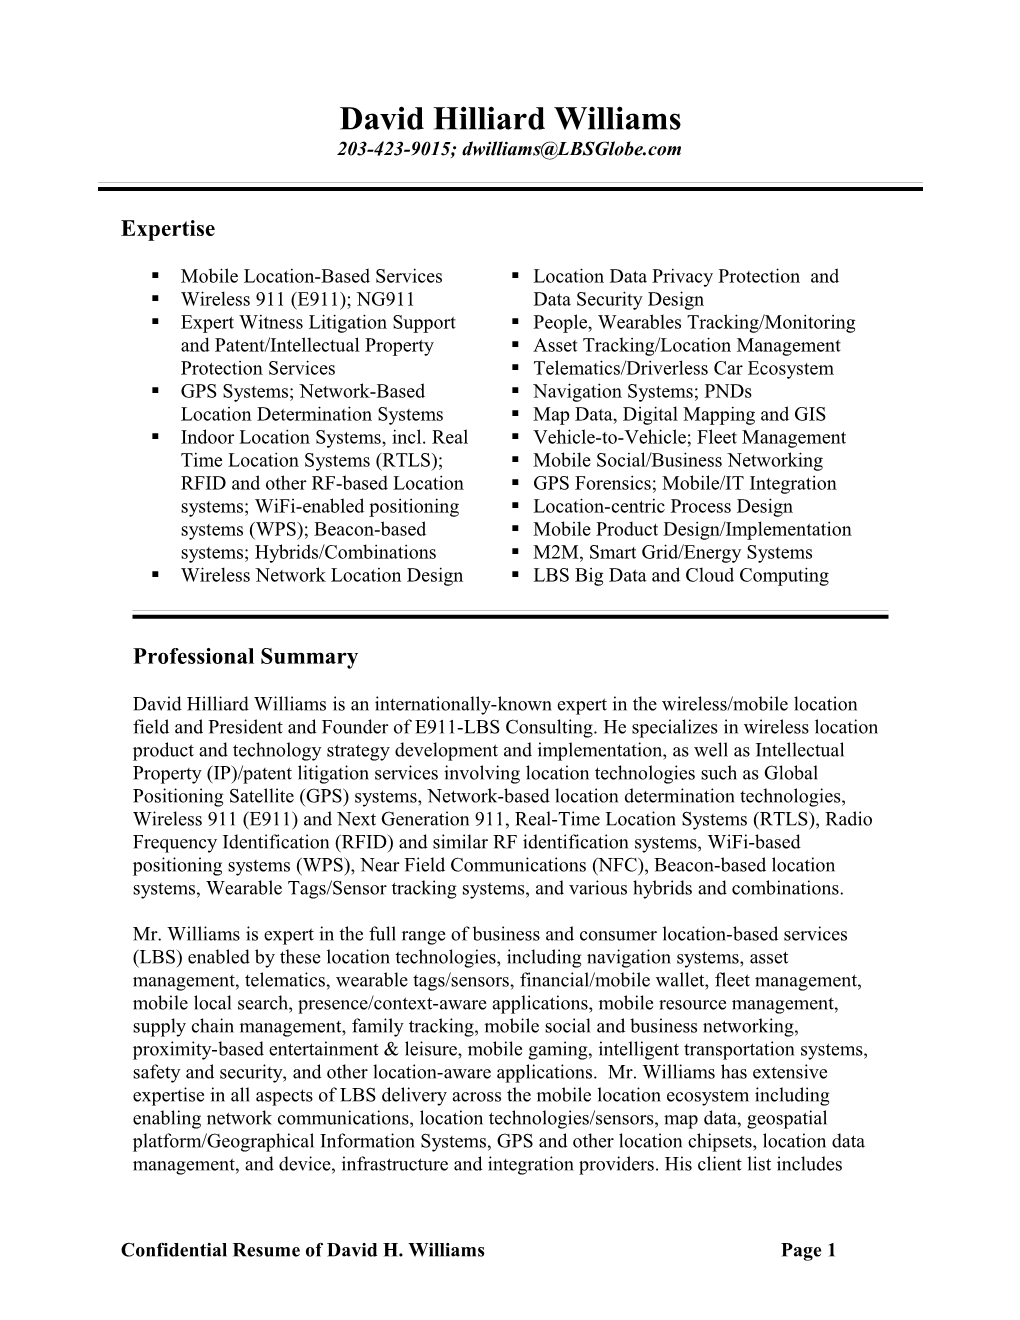 Confidential Resume of David H. Williams Page 1